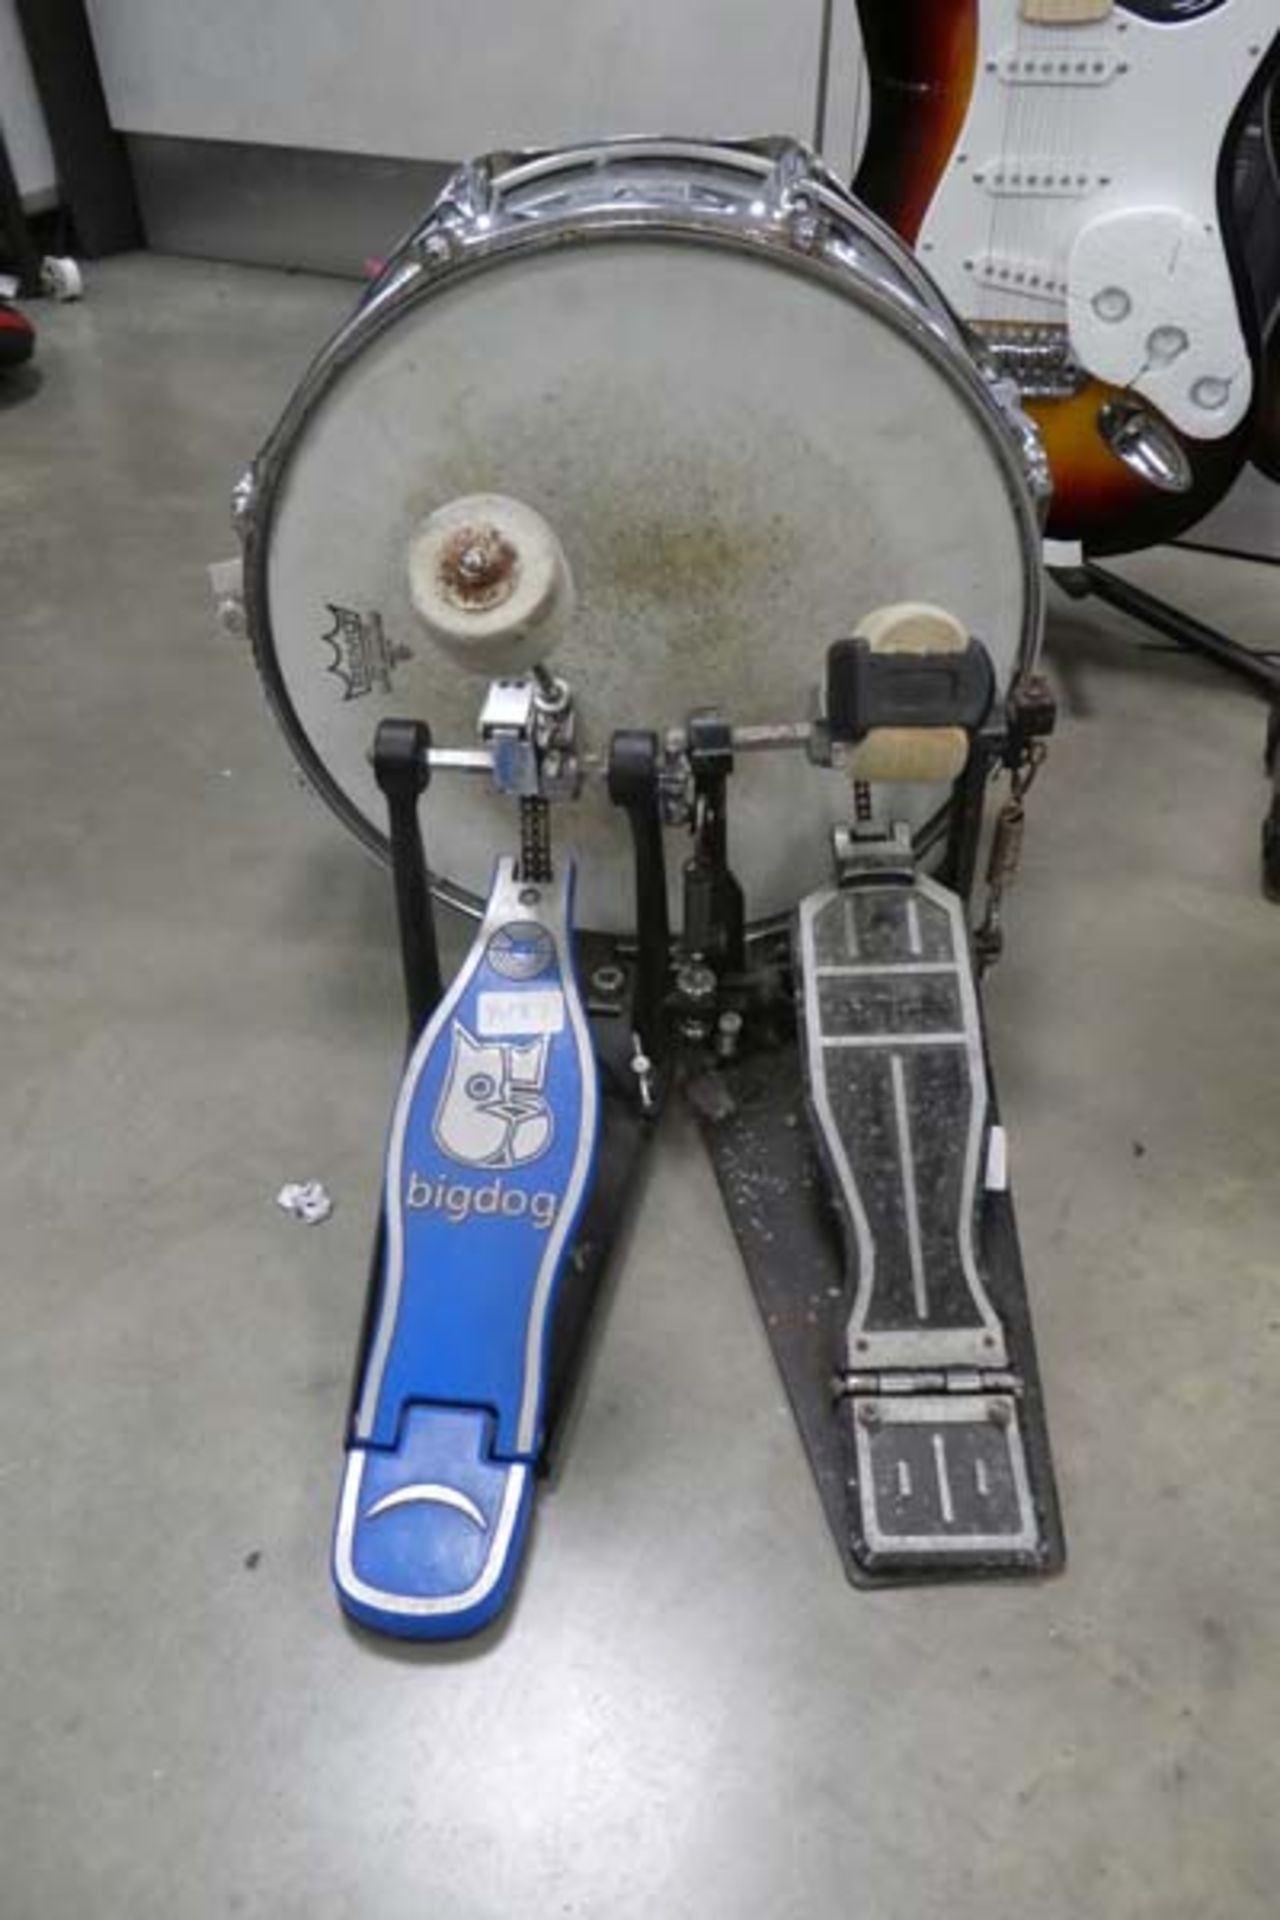 Big Dog drum pedal and another drum pedal together with a Yamaha power special snare drum with